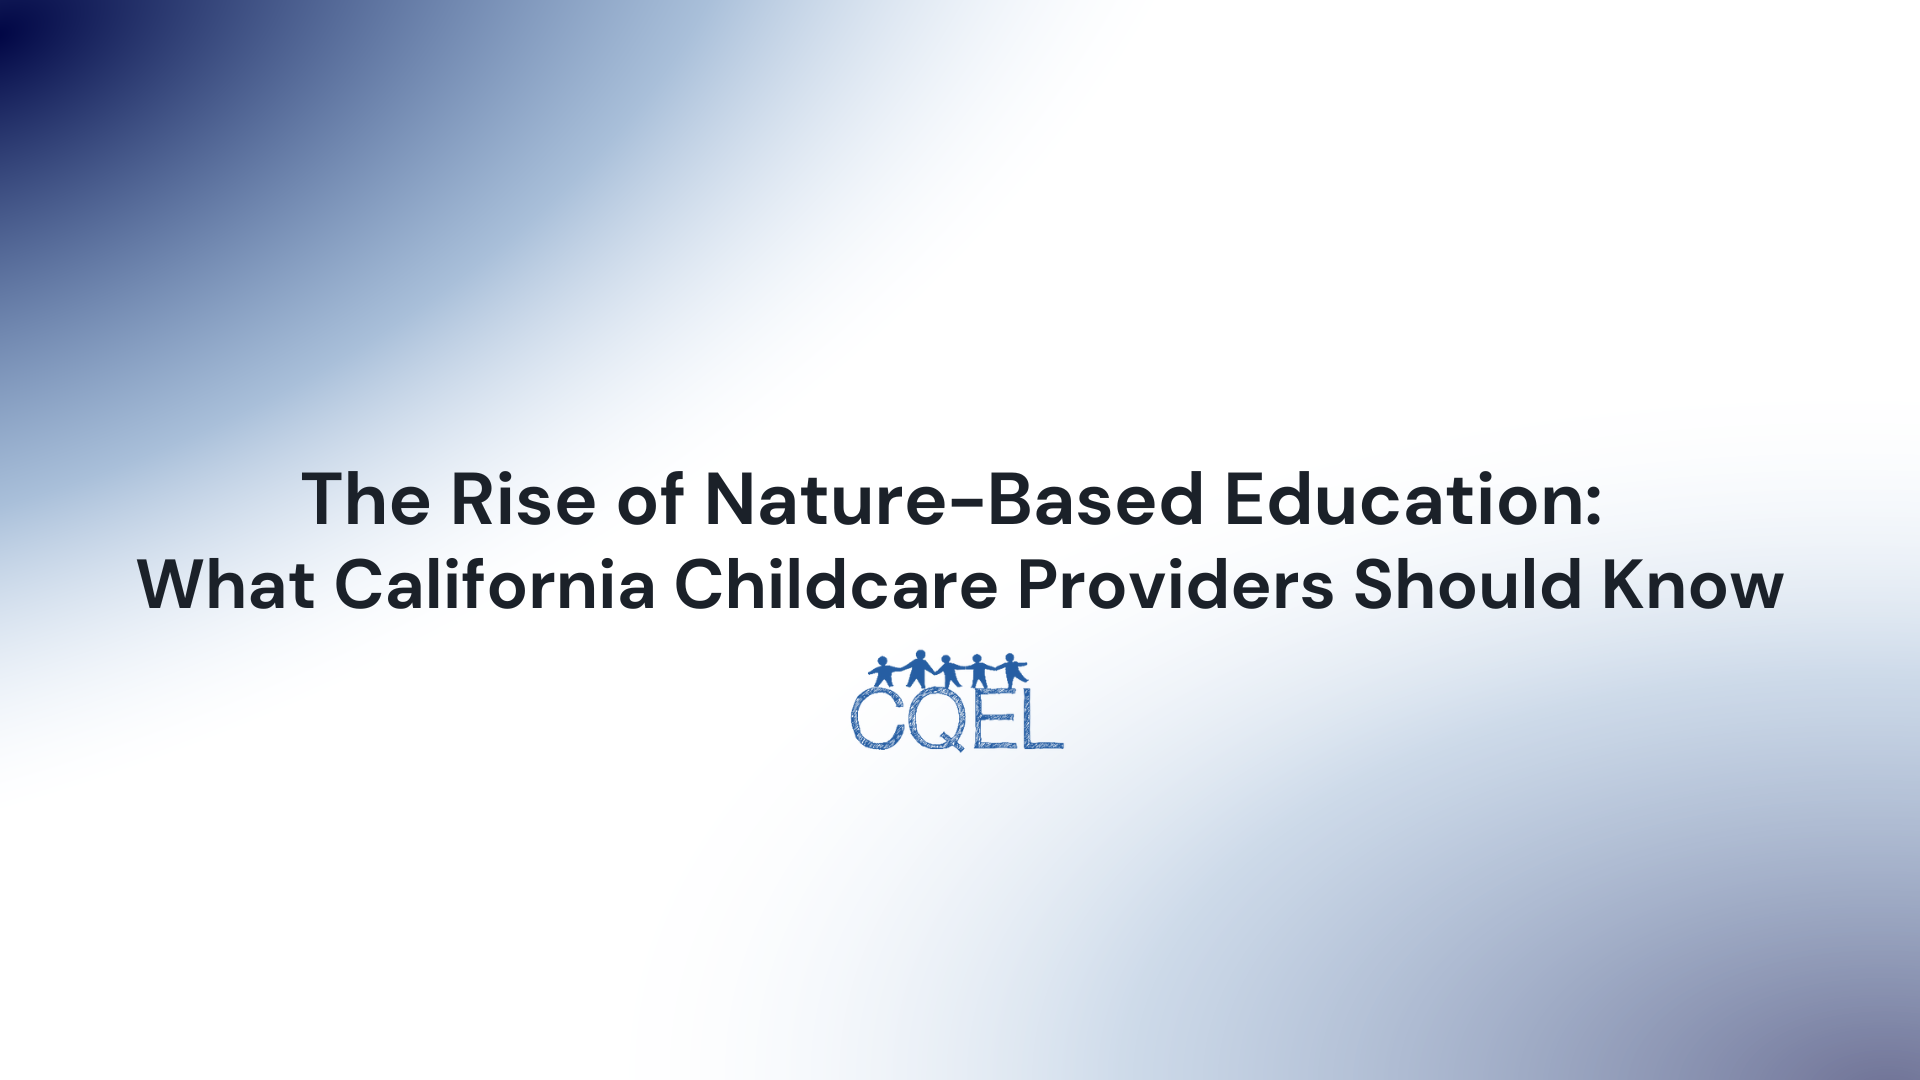 The Rise of Nature-Based Education: What California Childcare Providers Should Know